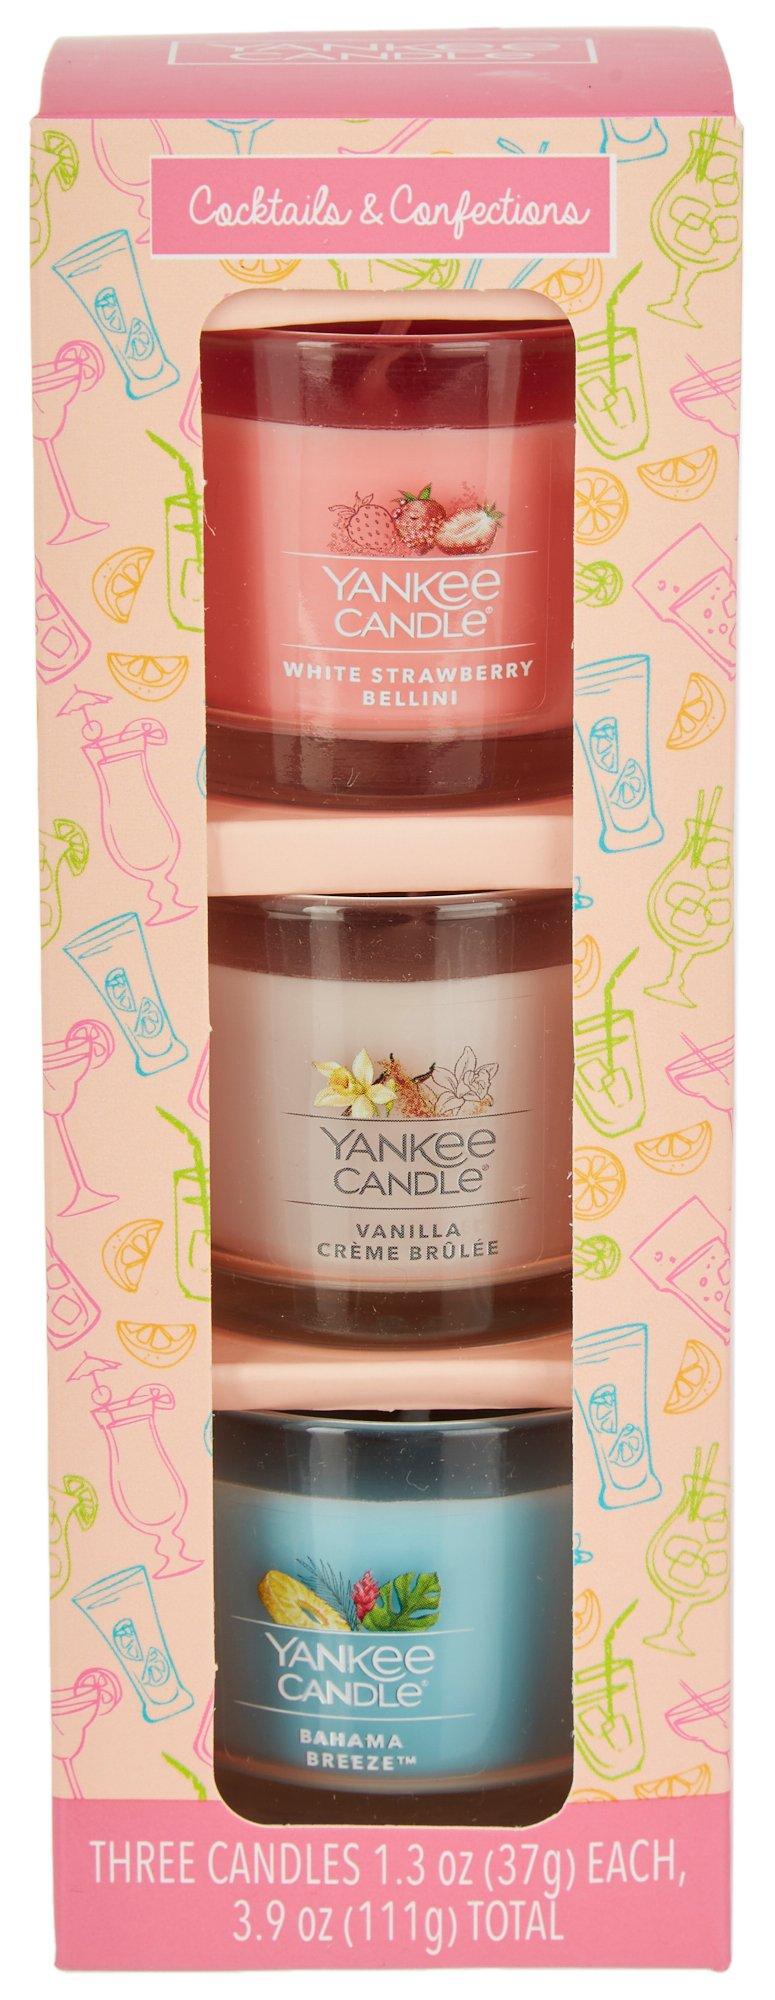 Yankee Candle 3 Pk Cocktails and Confections Mini